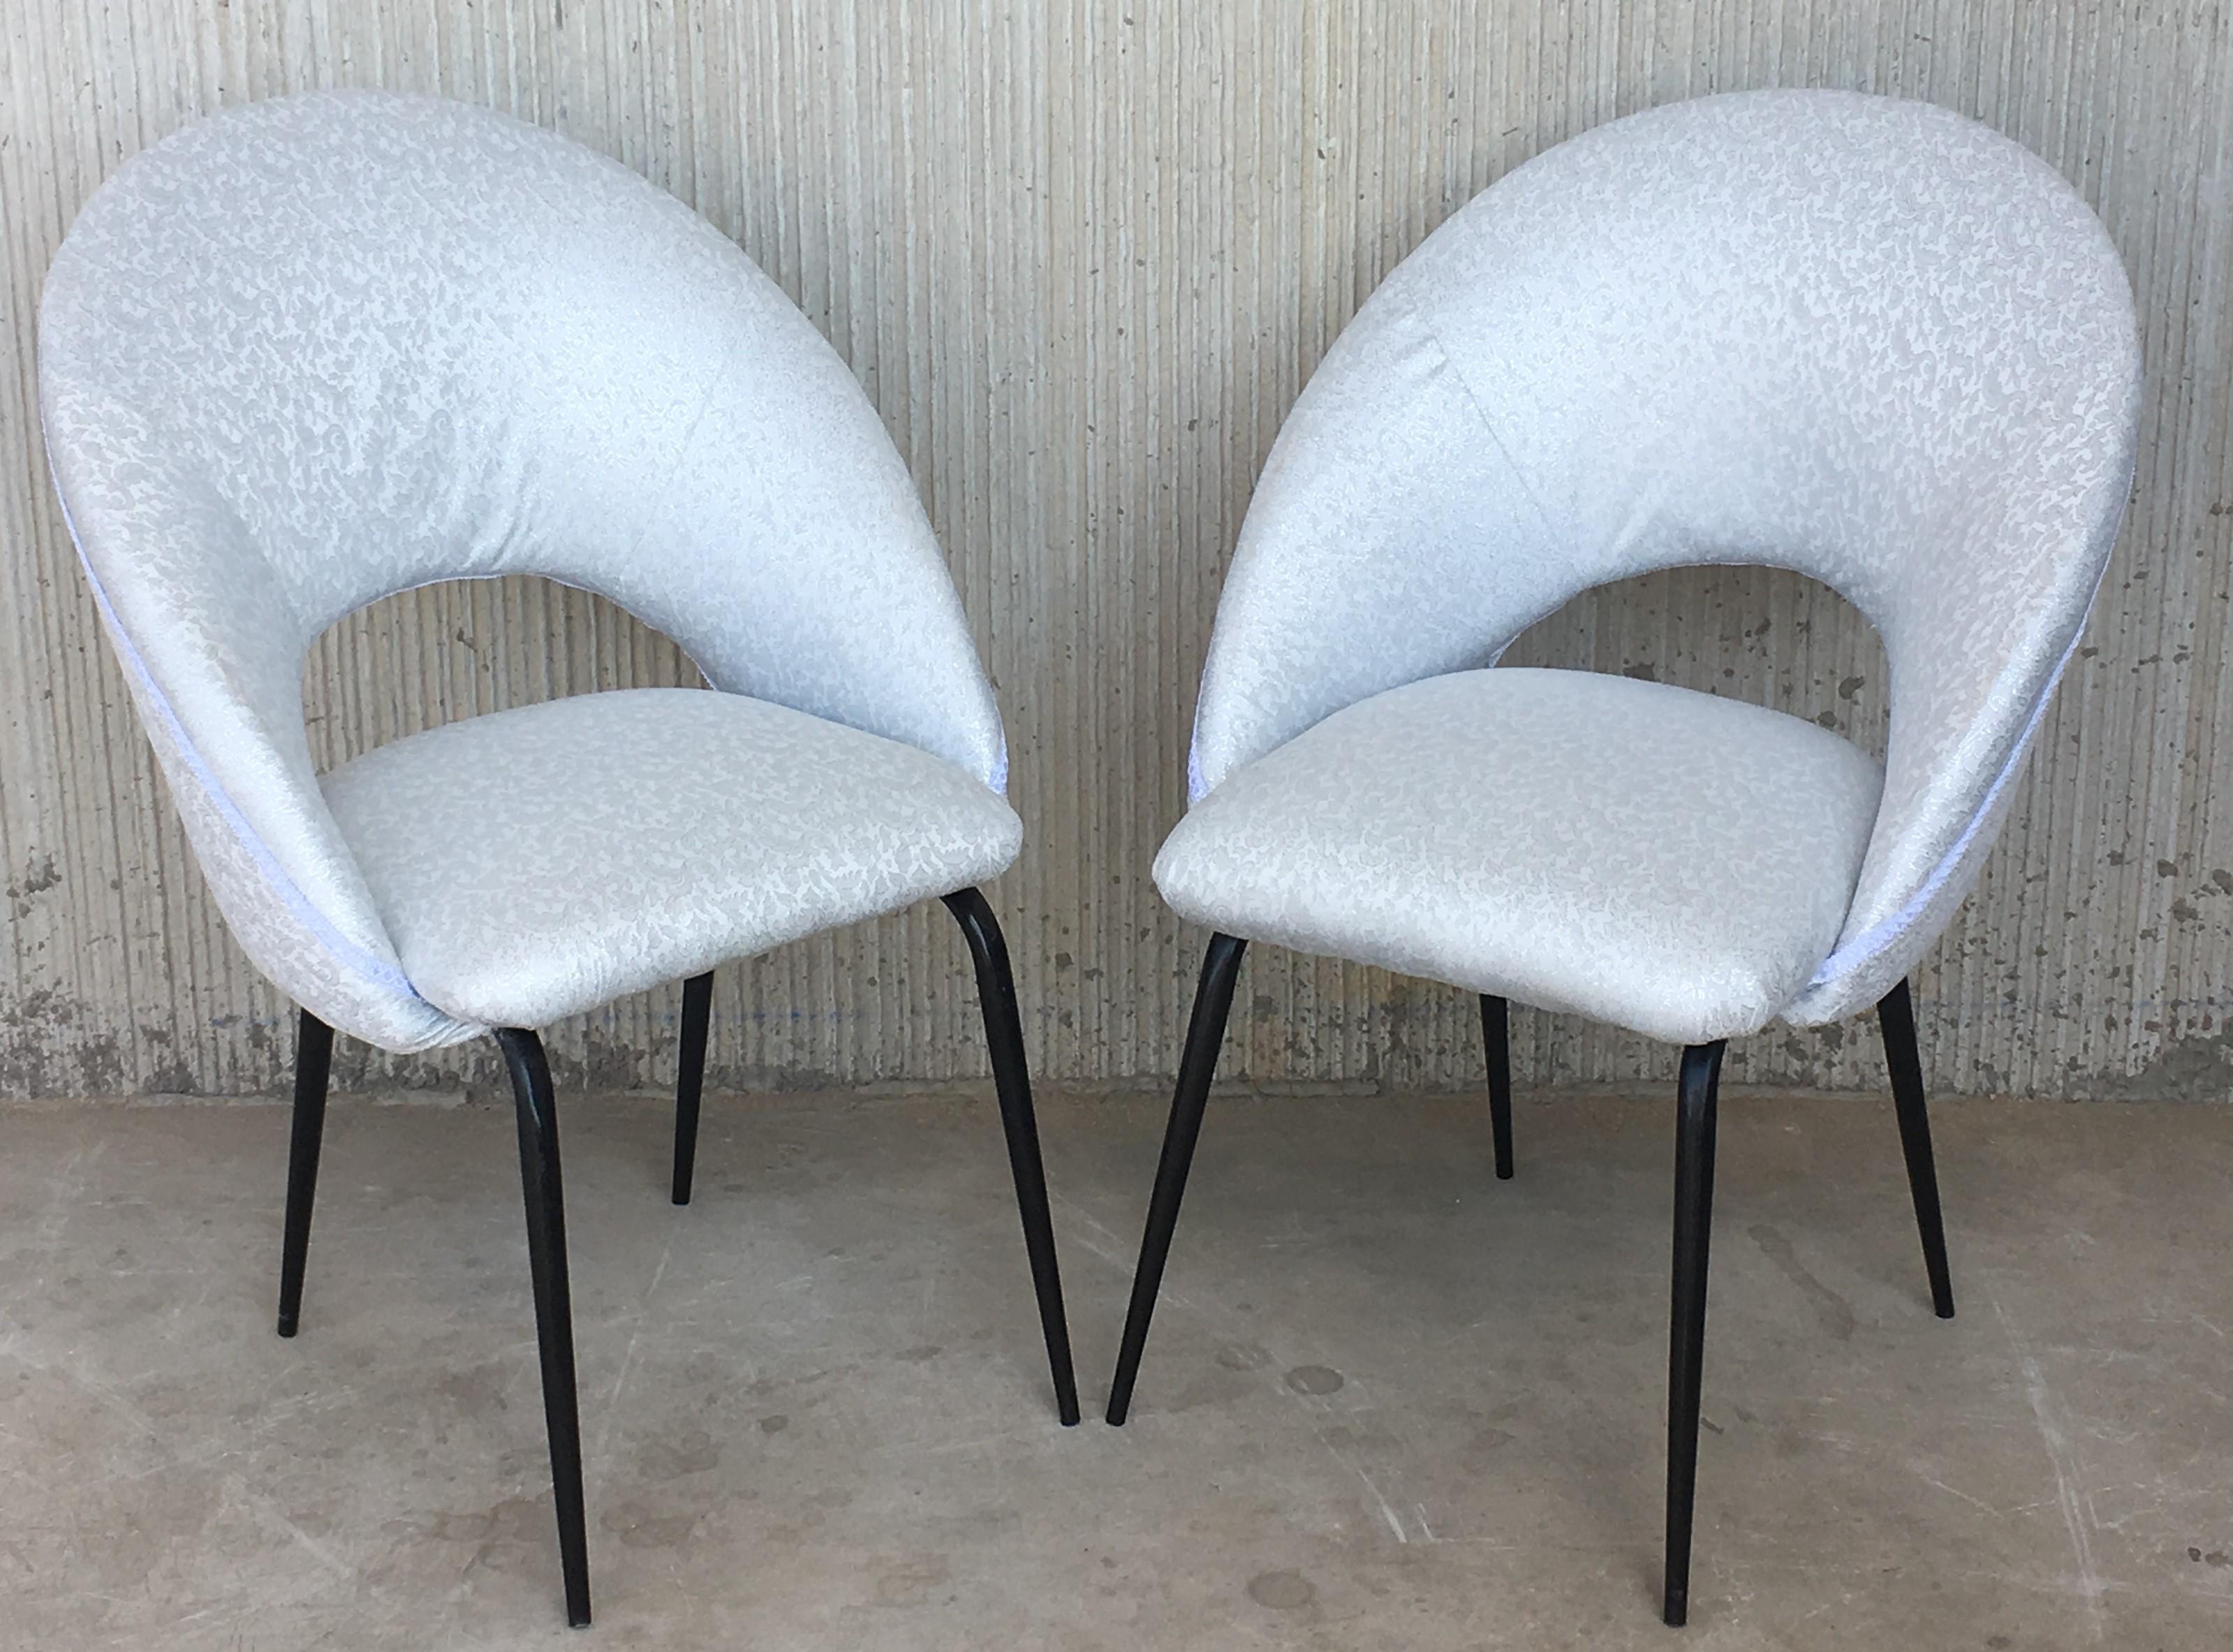 Midcentury Pair of Italian Chairs with Arched Seats and Arched Backrest im Zustand „Gut“ in Miami, FL